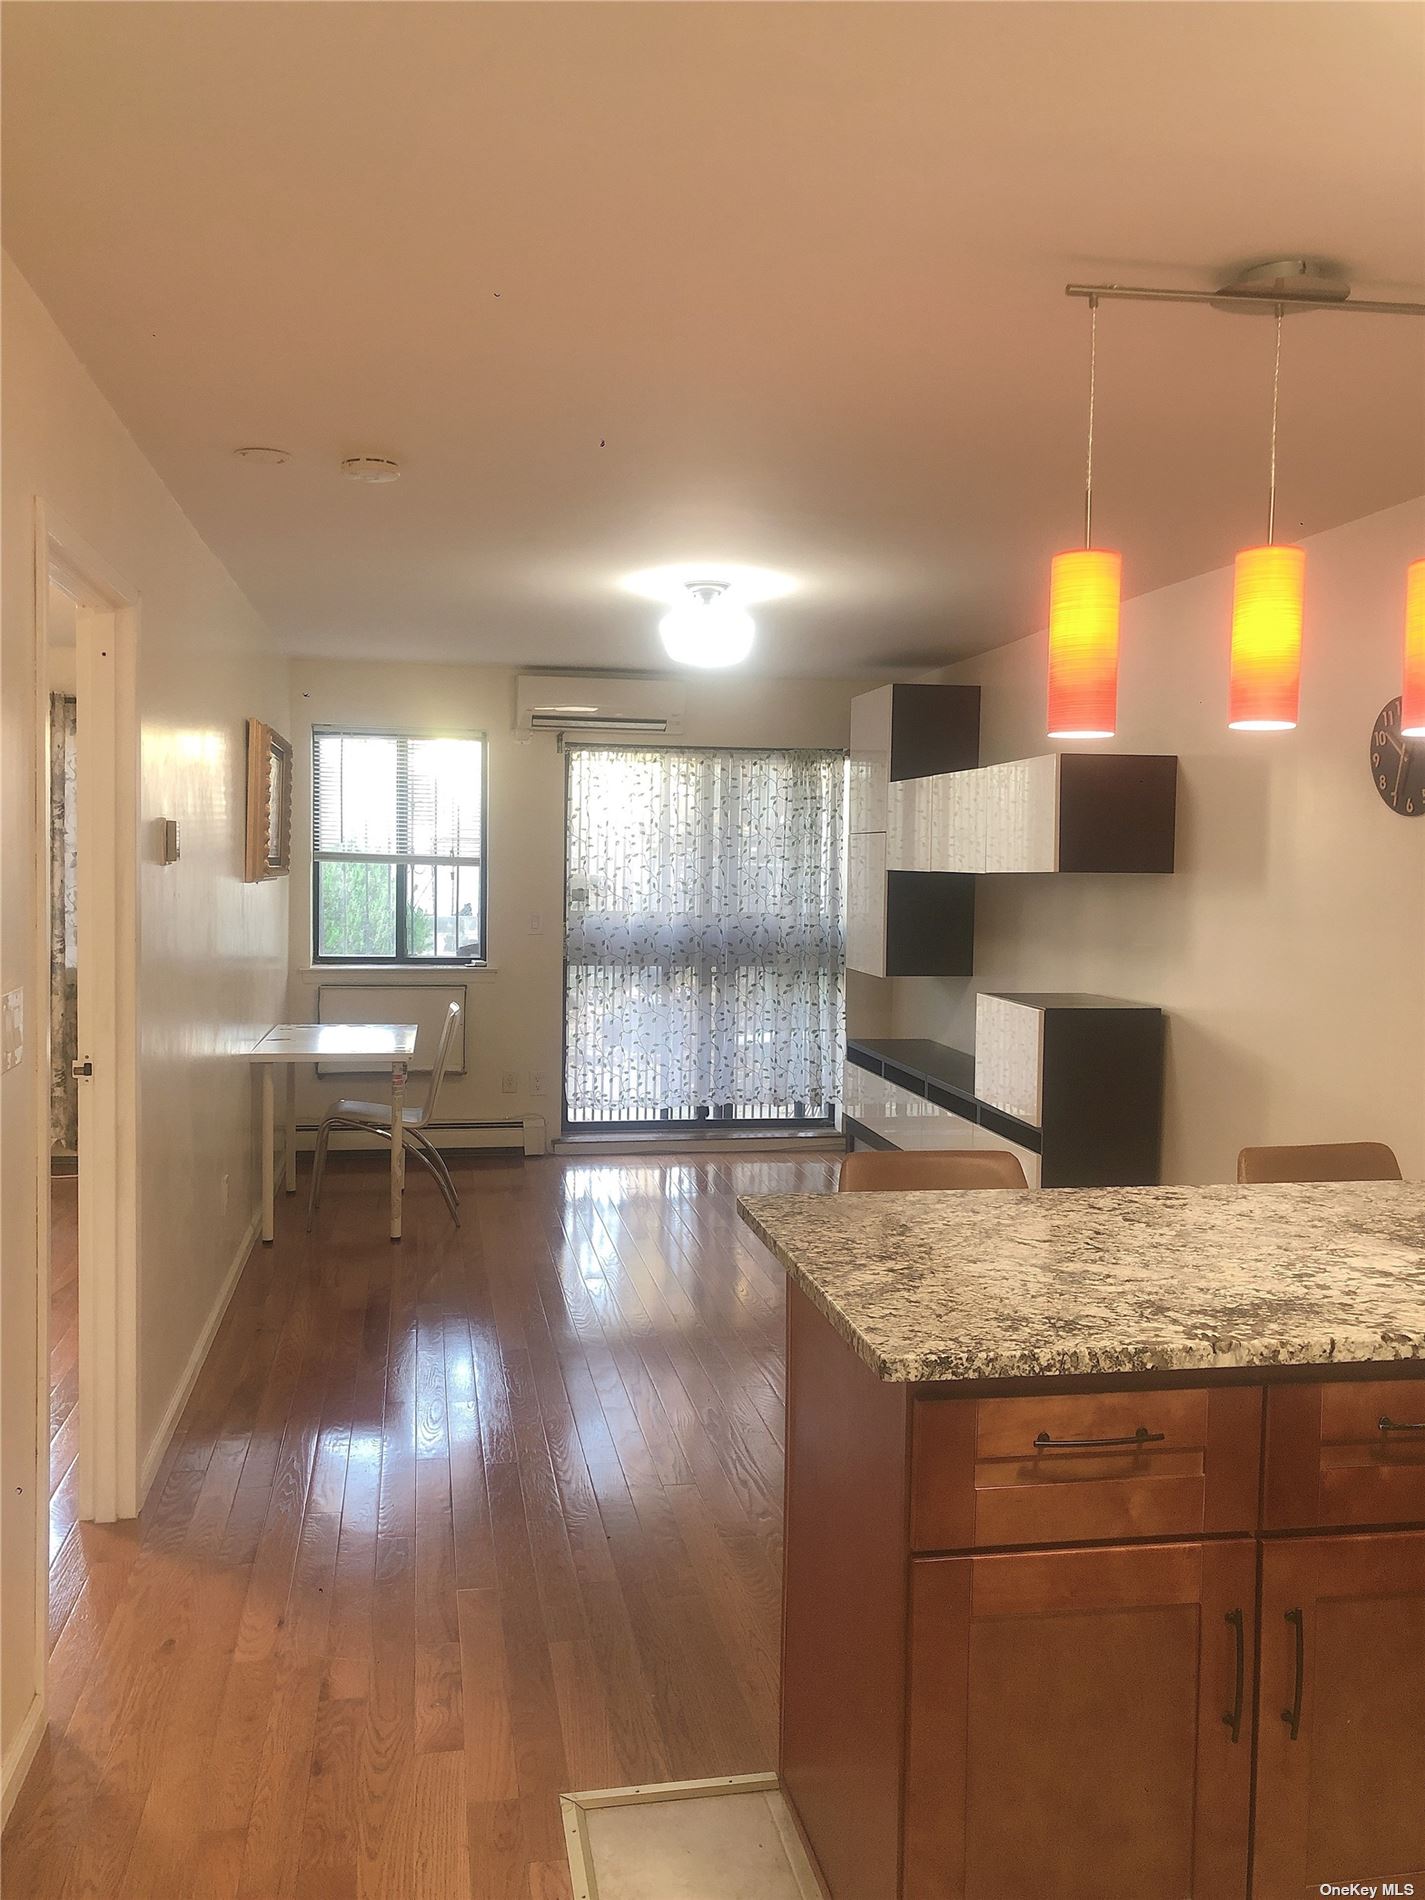 Apartment in Elmhurst - 53rd  Queens, NY 11373